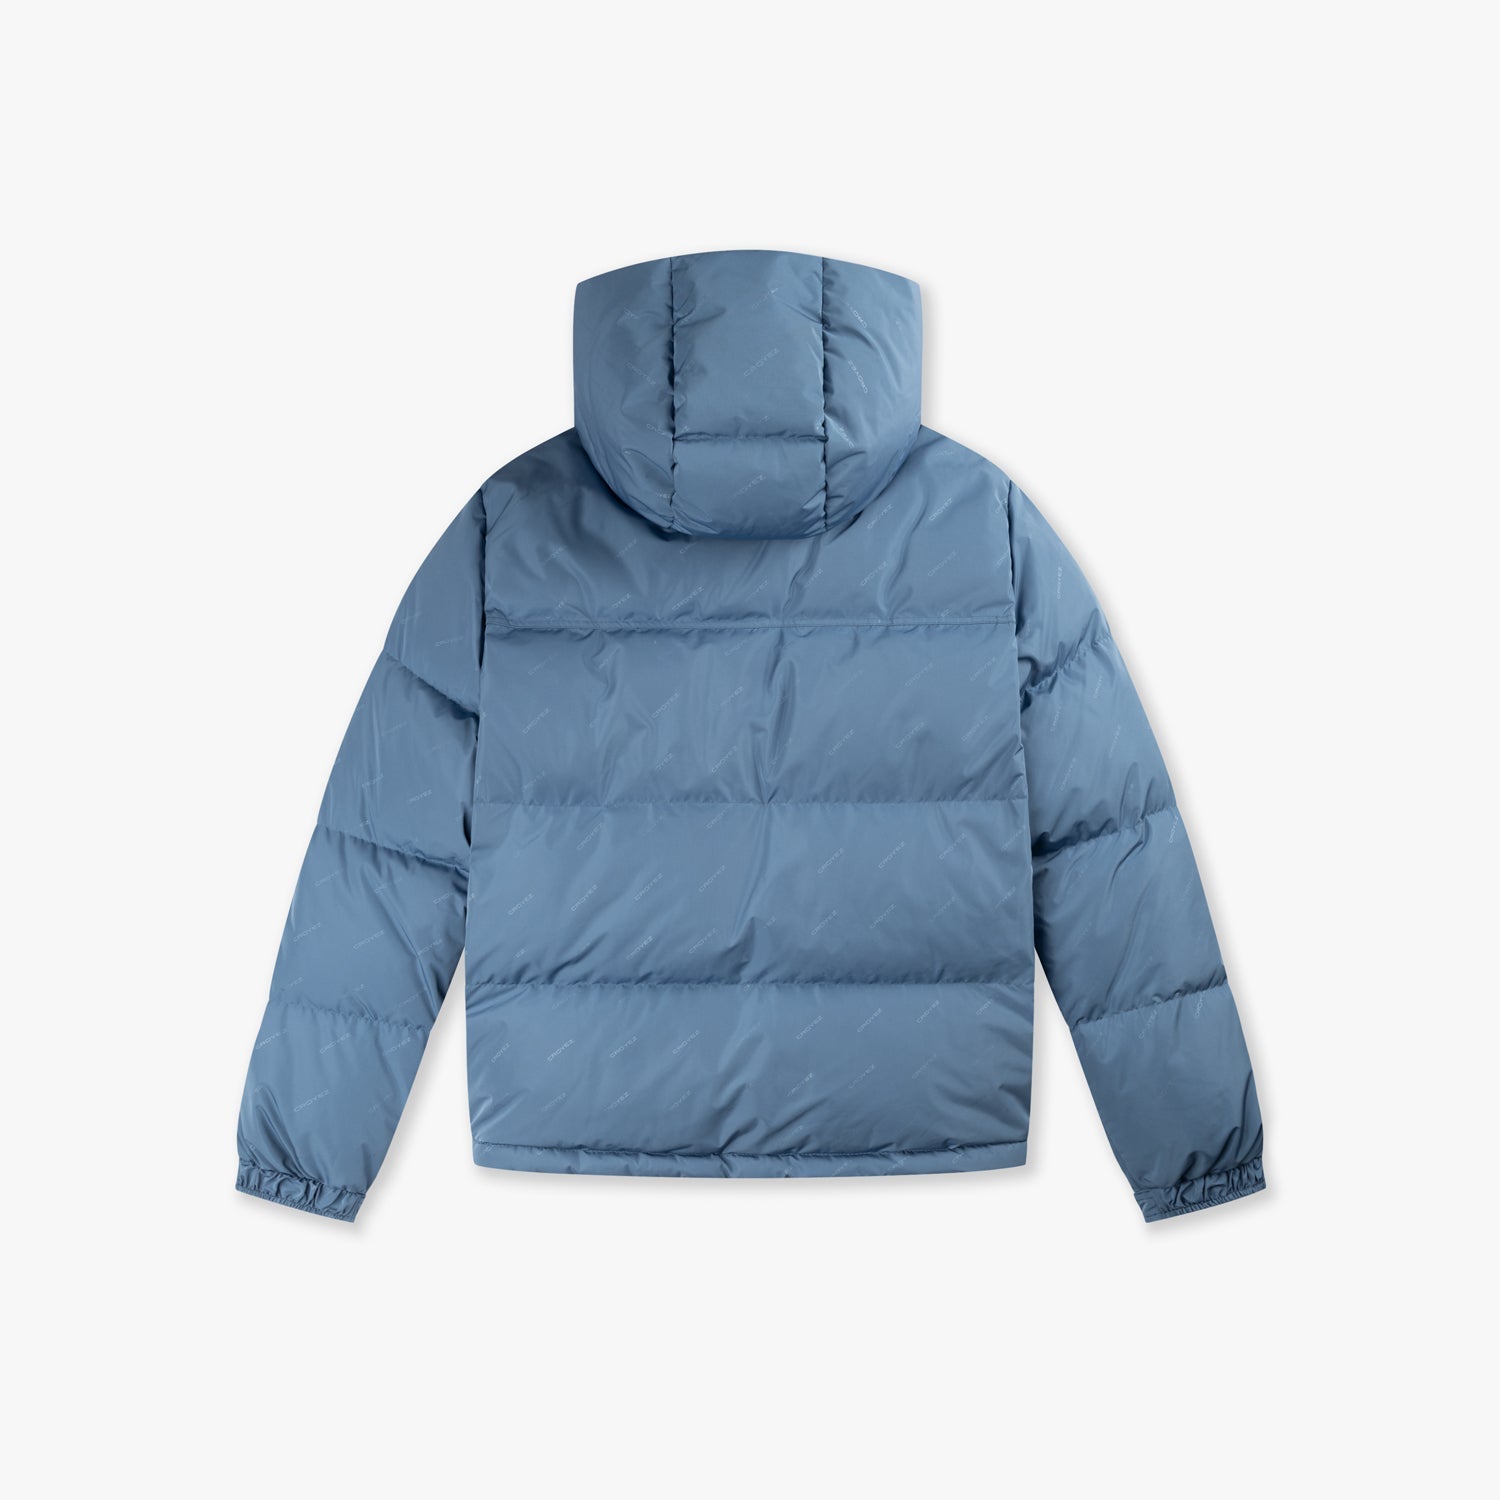 Croyez All-Over Puffer Jacket